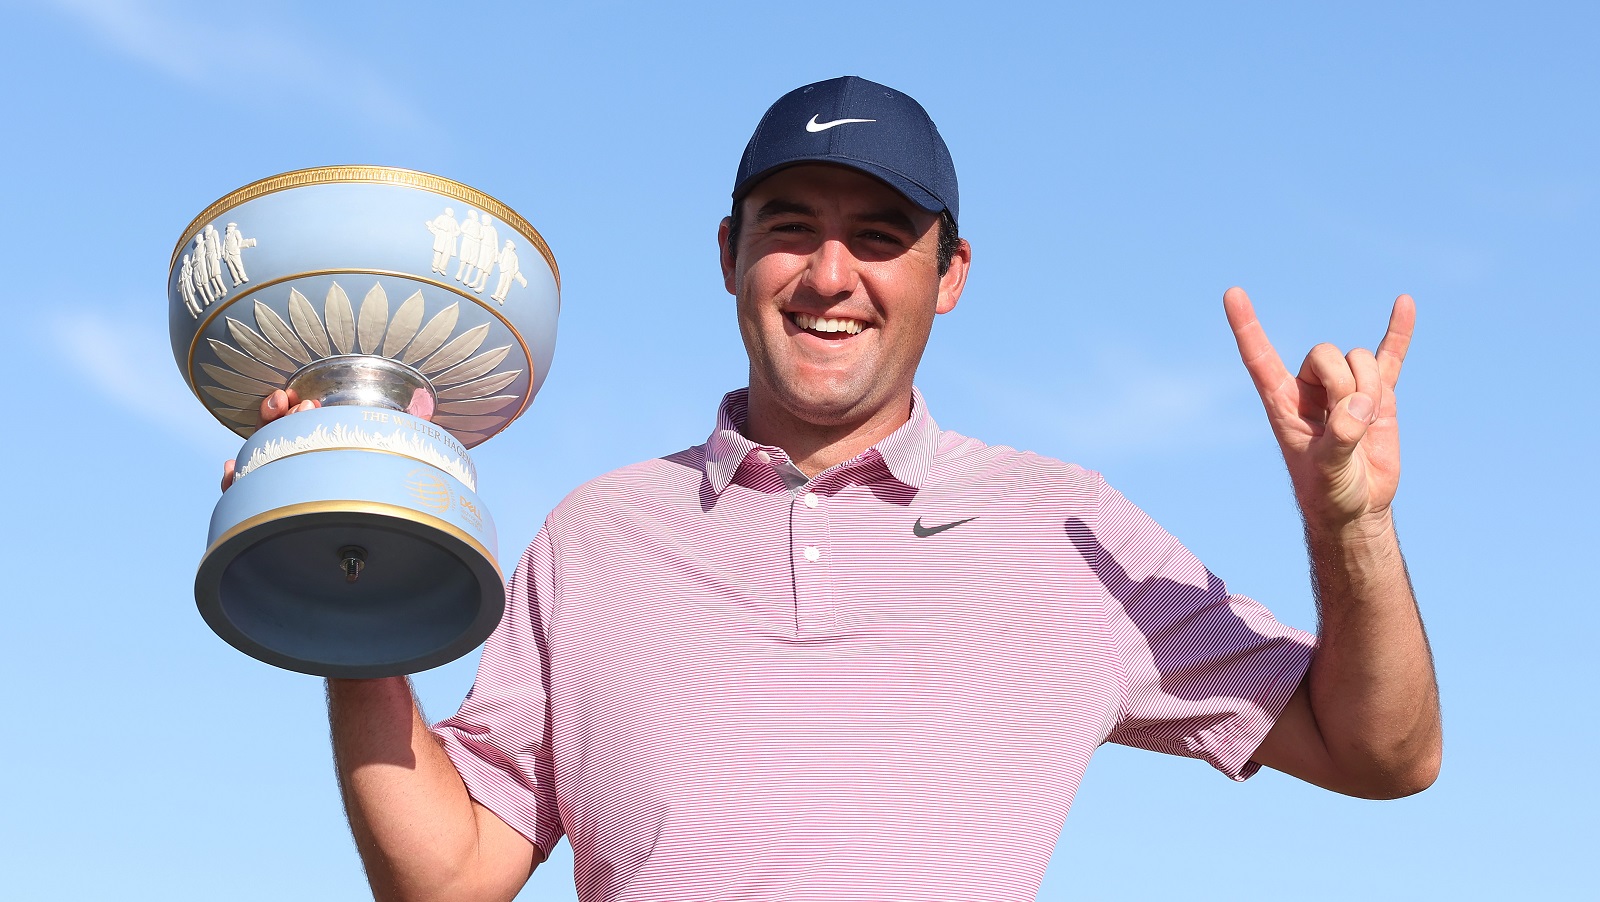 Scottie Scheffler poses with the Walter Hagen Cup after defeating Kevin Kisner in their finals match to win the World Golf Championships-Dell Technologies Match Play at Austin Country Club on March 27, 2022. | Gregory Shamus/Getty Images